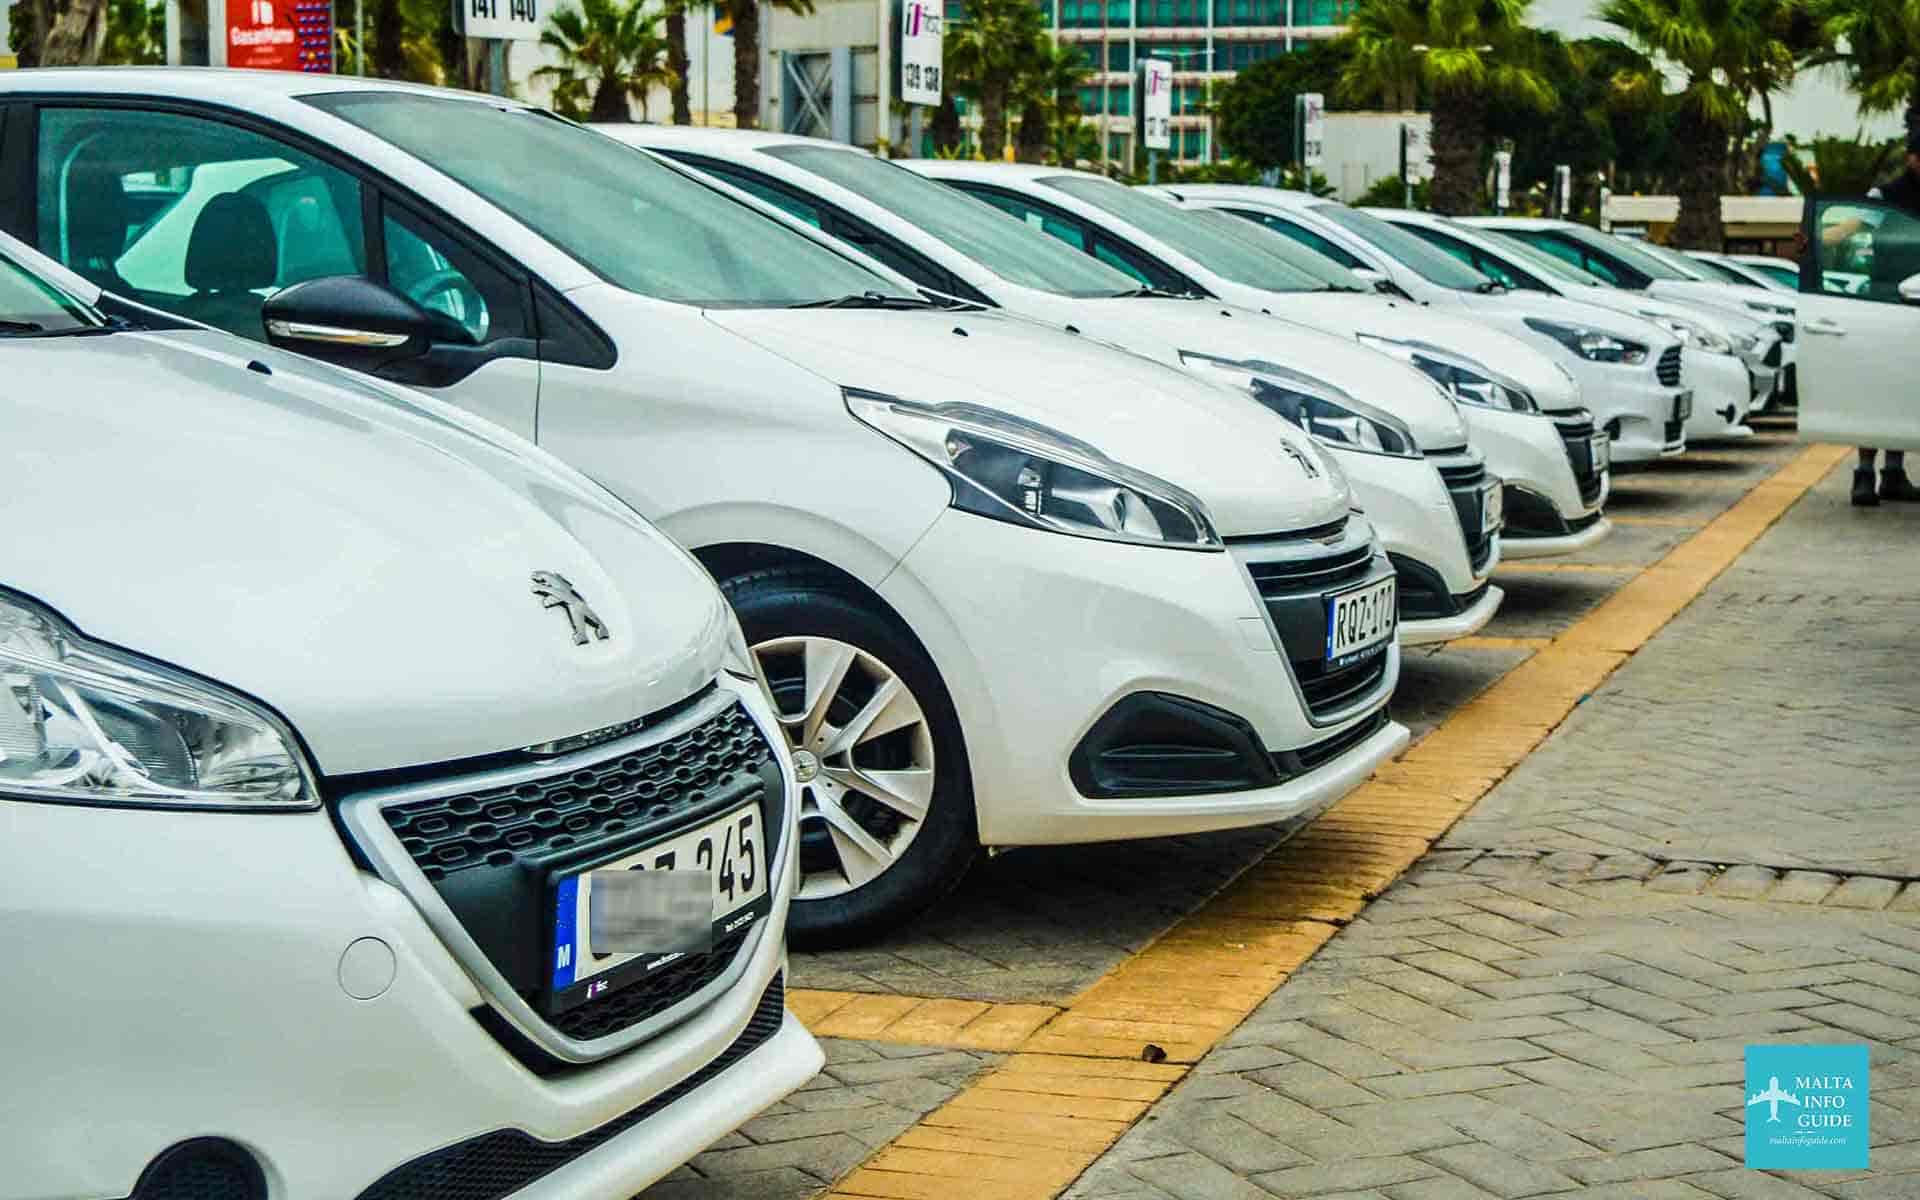 A selection of Peugeot car rentals parked at Malta International Airport.